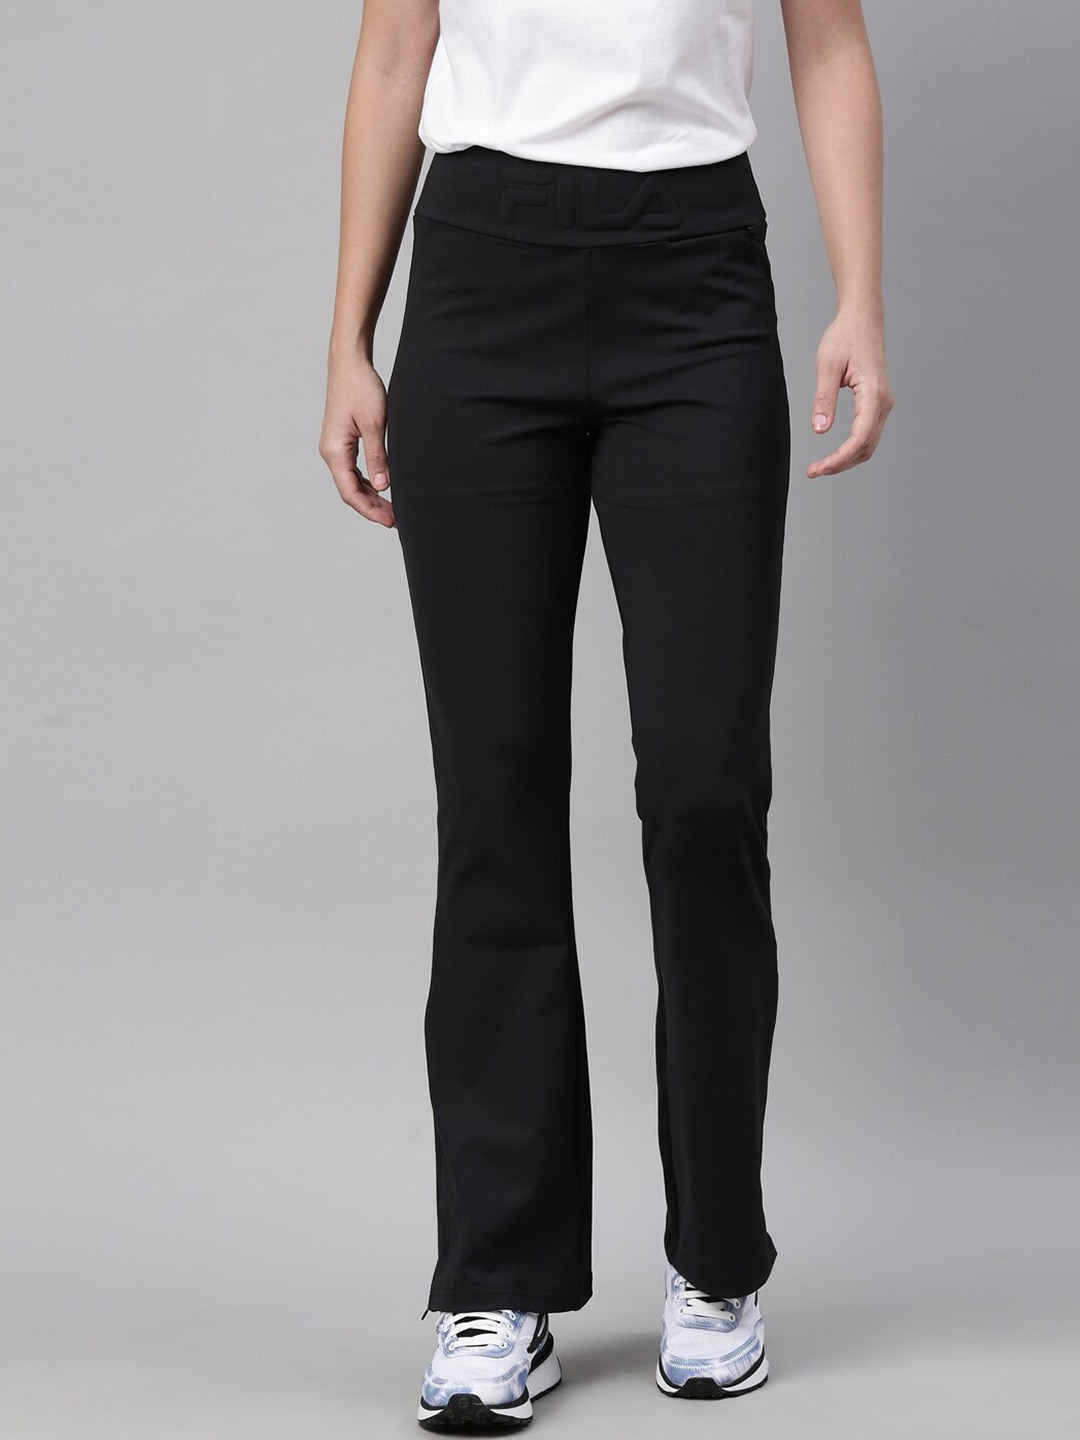 Women's Black Polyester  Trousers